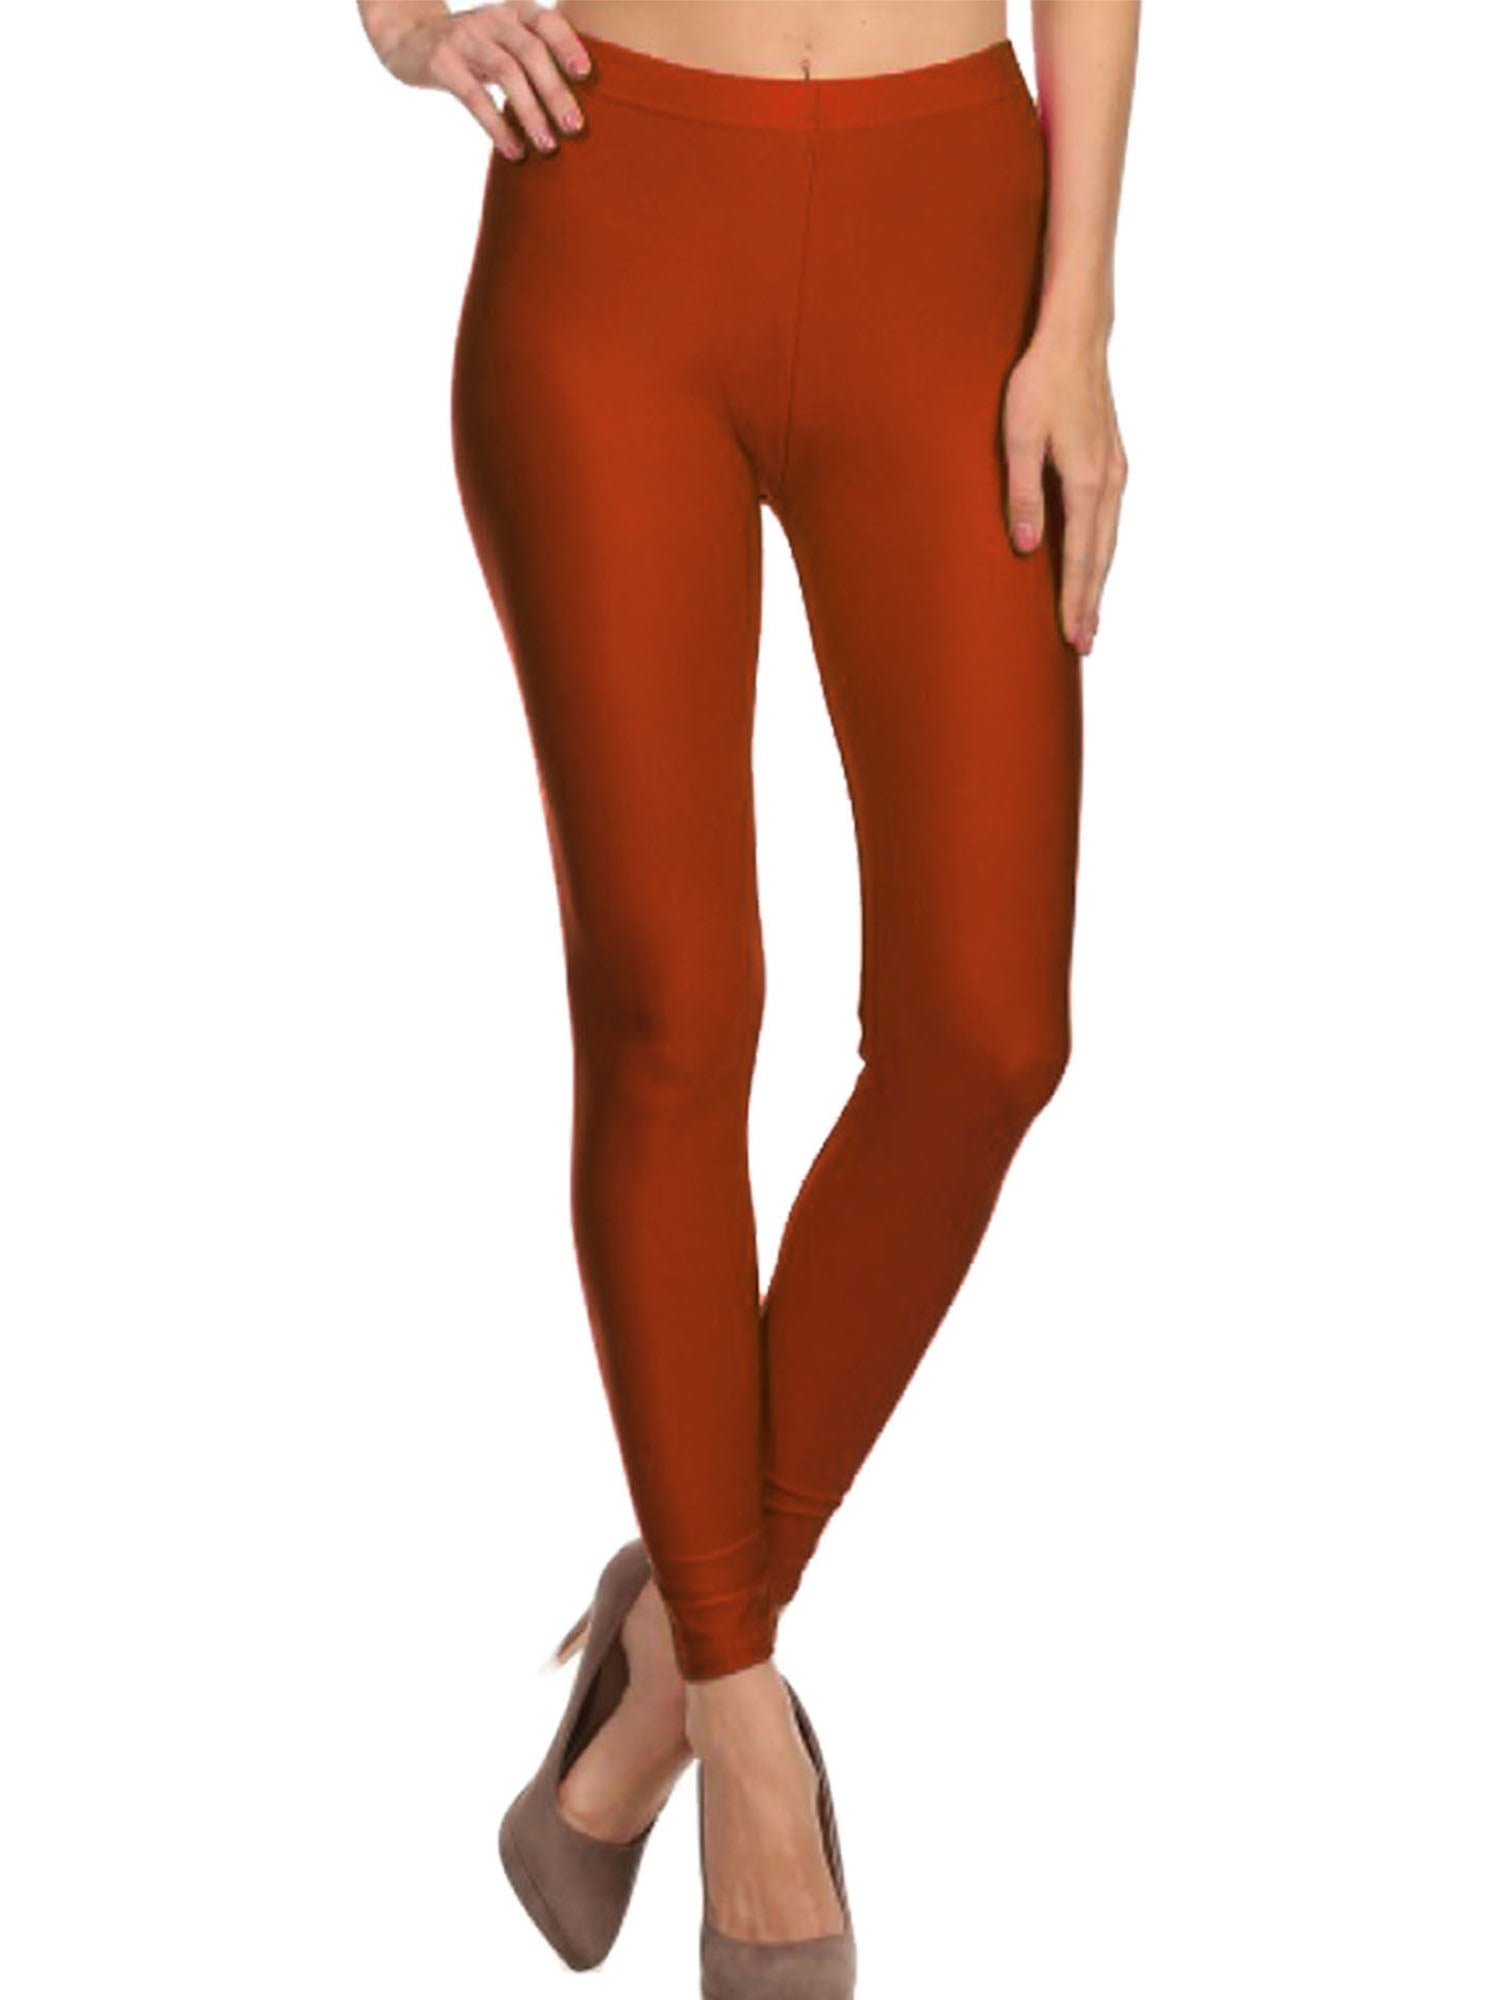 Simplicity - Women Solid Color Basic Leggings Tight Pants, SS9003 ...